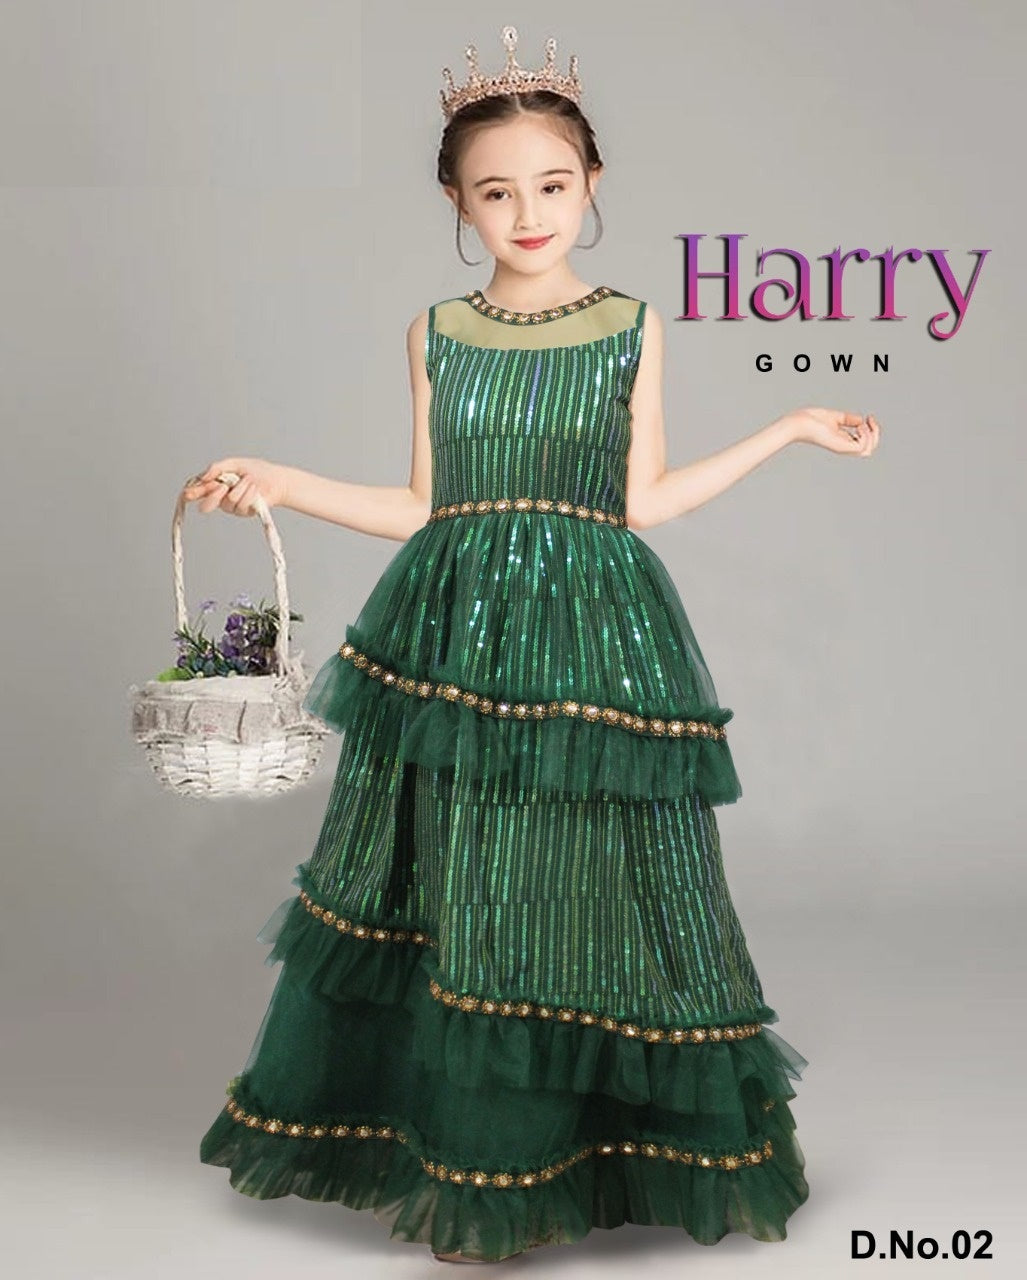 Designer Harry Children Kids Gwon Dno.02 Anant Tex Exports Private Limited